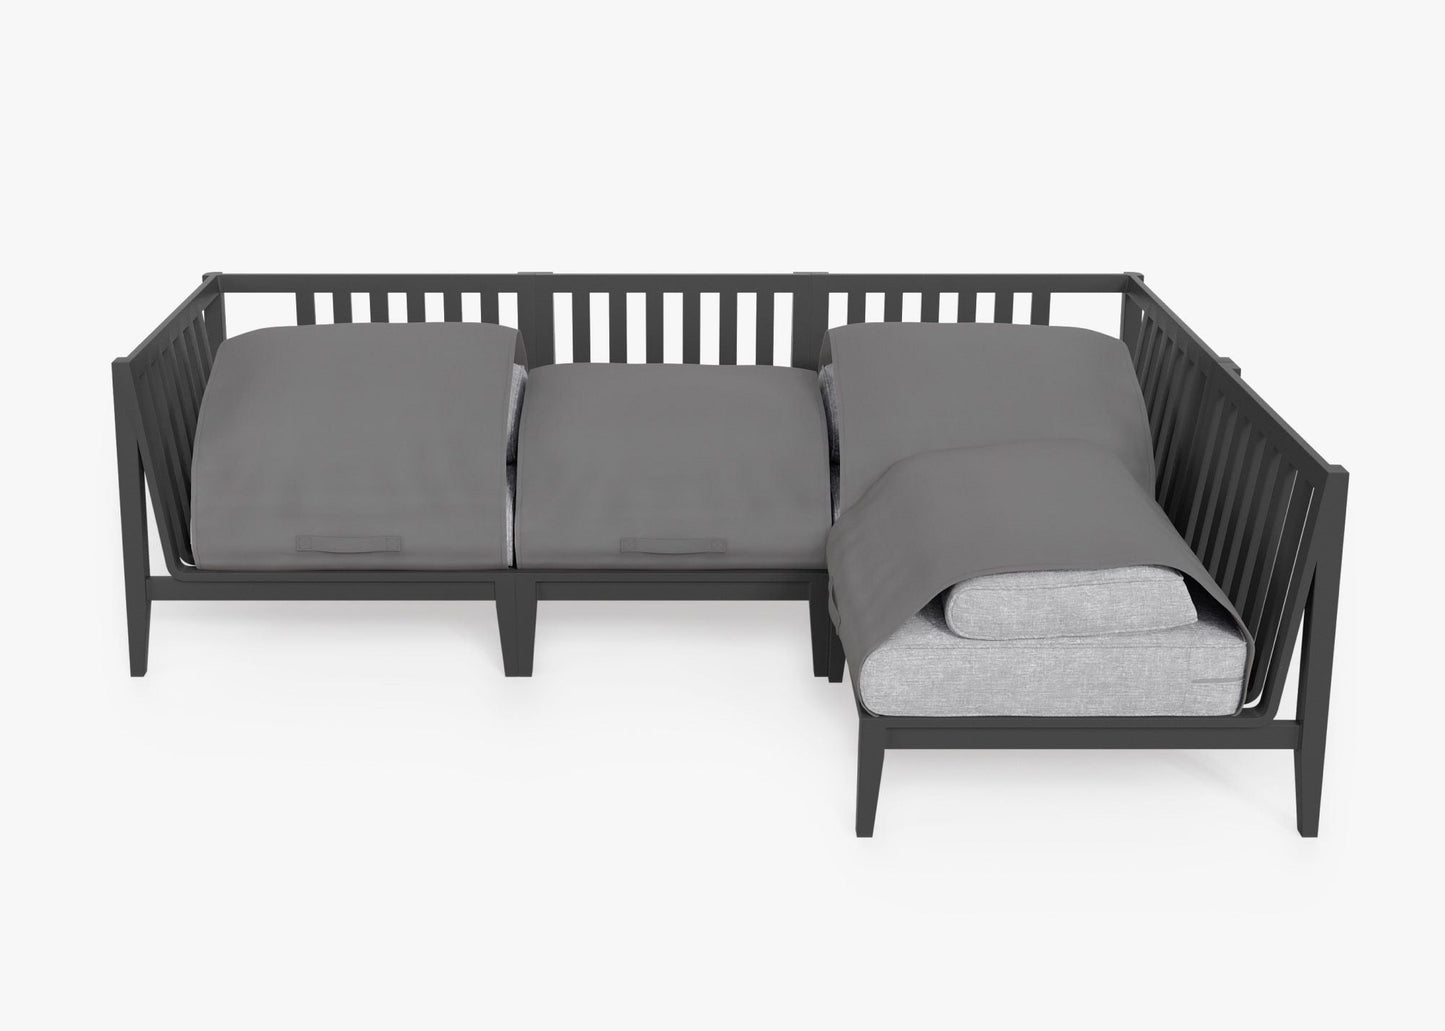 Live Outer 98" x 64" Charcoal Aluminum Outdoor L Shape Sectional 4-Seat With Pacific Fog Gray Cushion